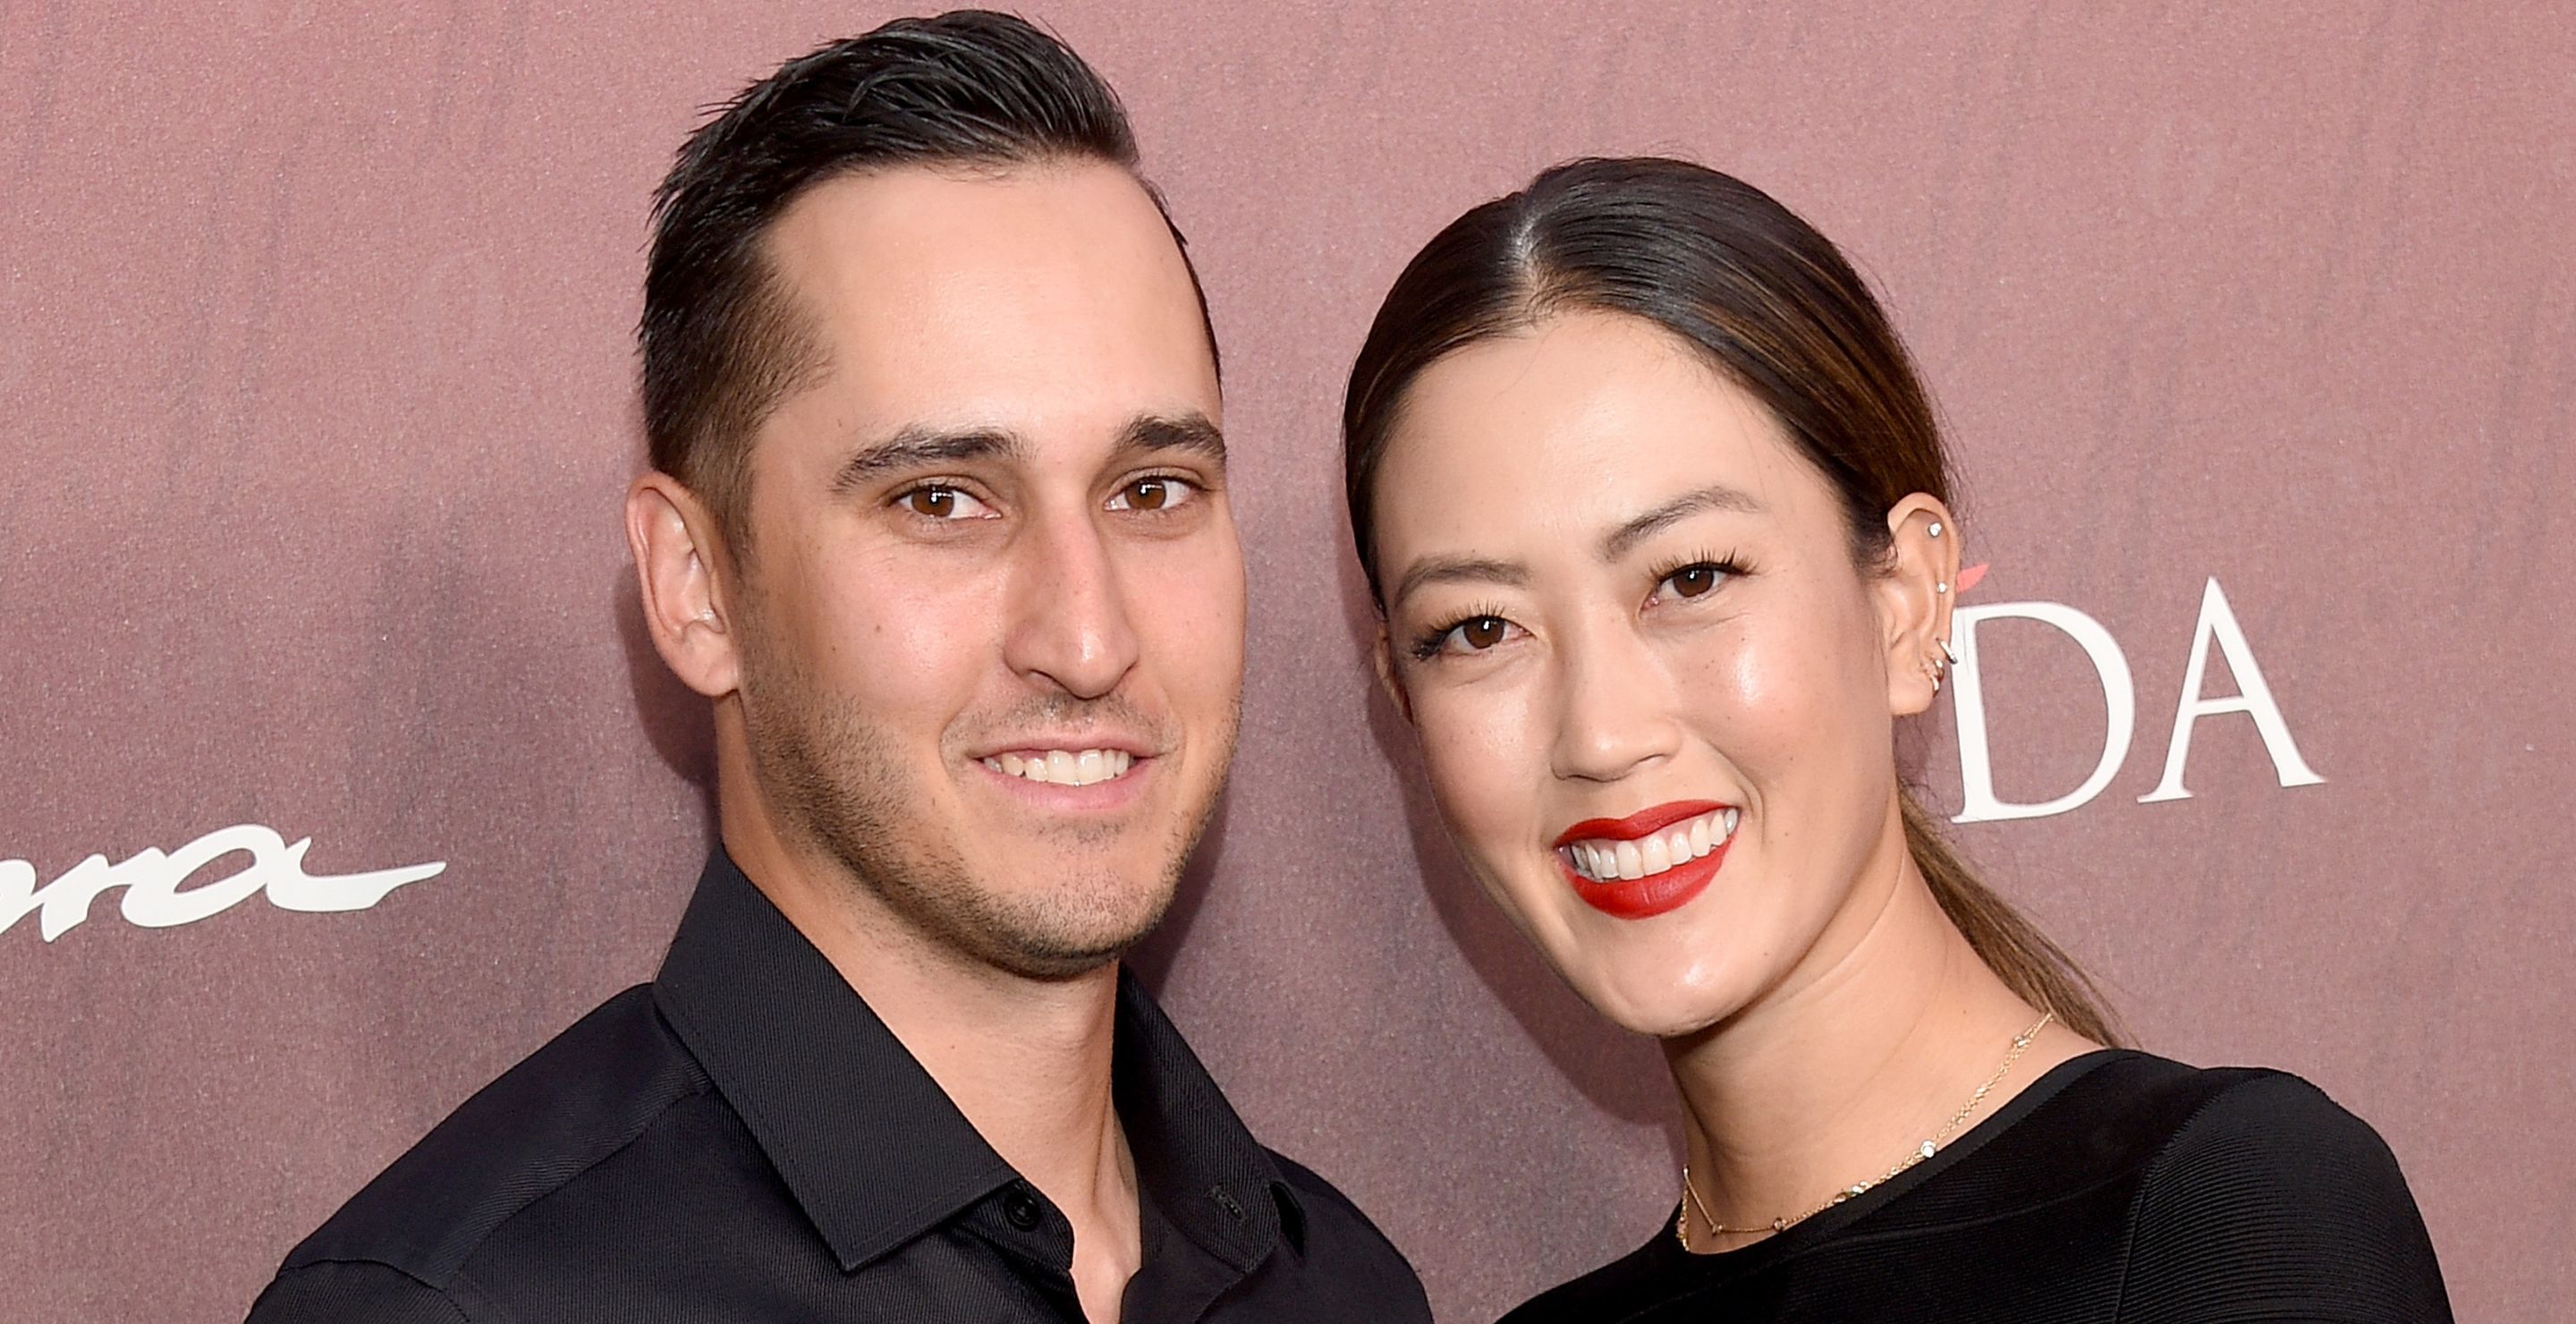 Michelle Wie West and her husband Jonnie pose for a picture.